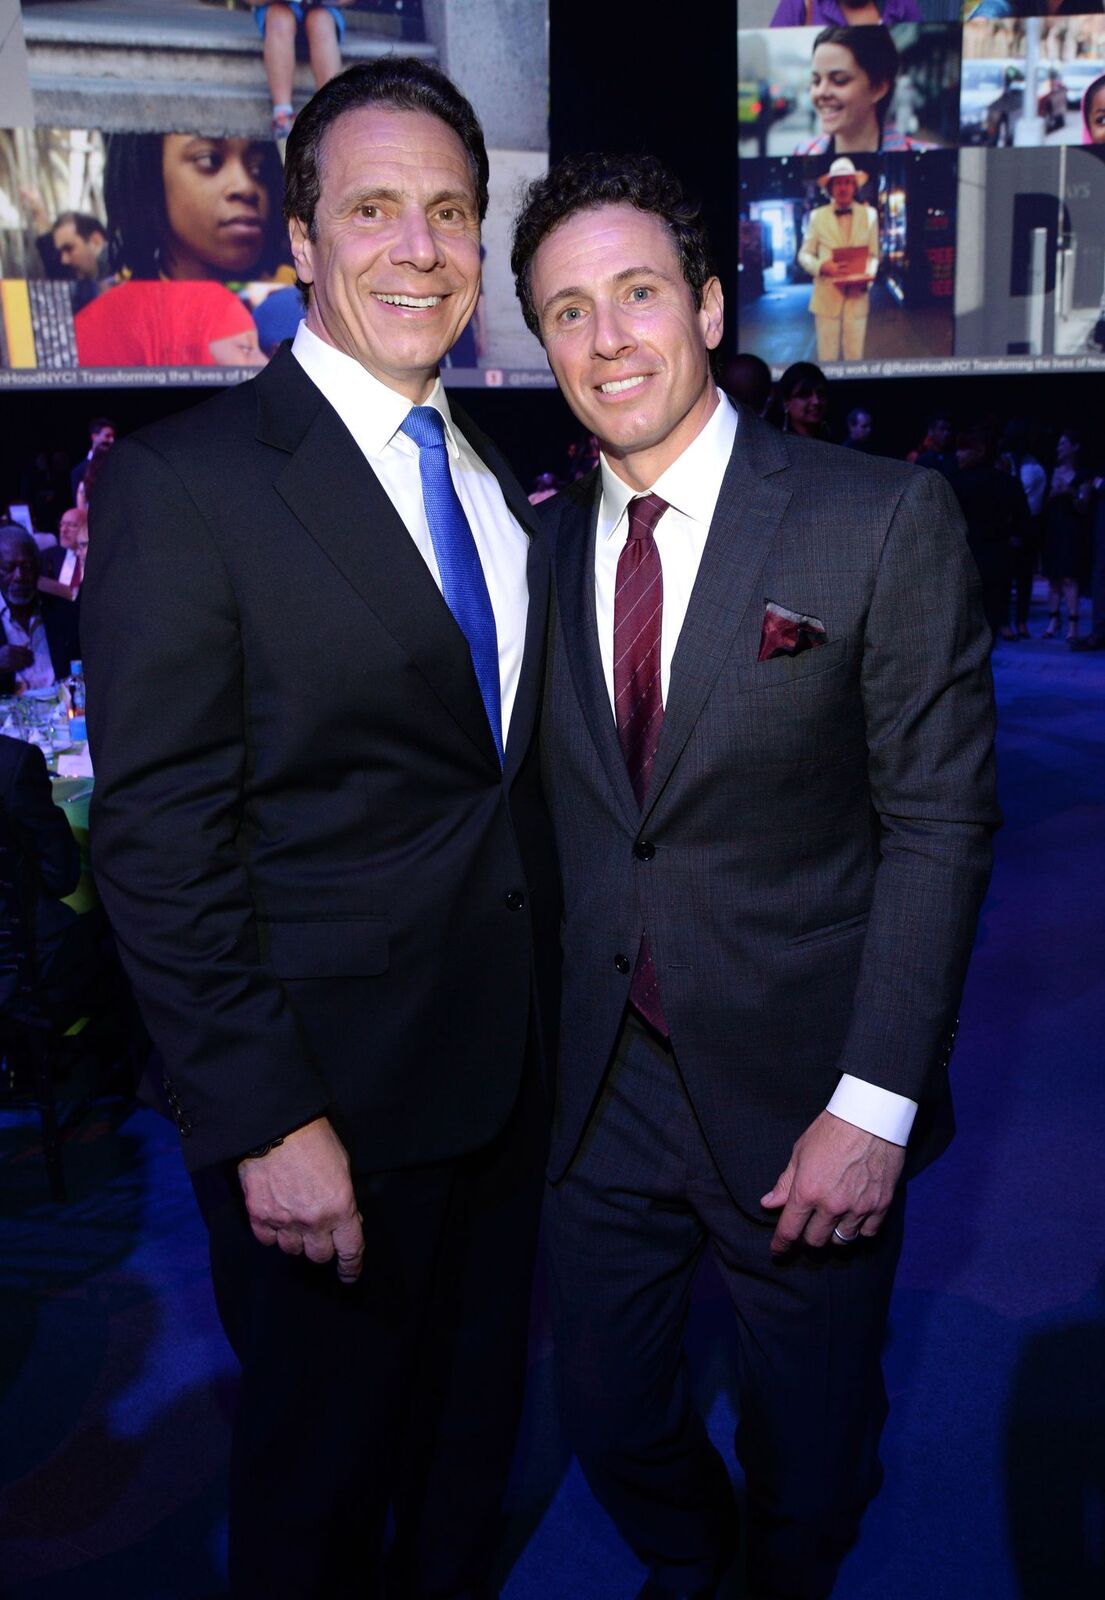 New York Governor Andrew Cuomo and Chris Cuomo at The Robin Hood Foundation's Benefit held at Jacob Javitz Center on May 12, 2015, in New York City | Photo: Kevin Mazur/Getty Images